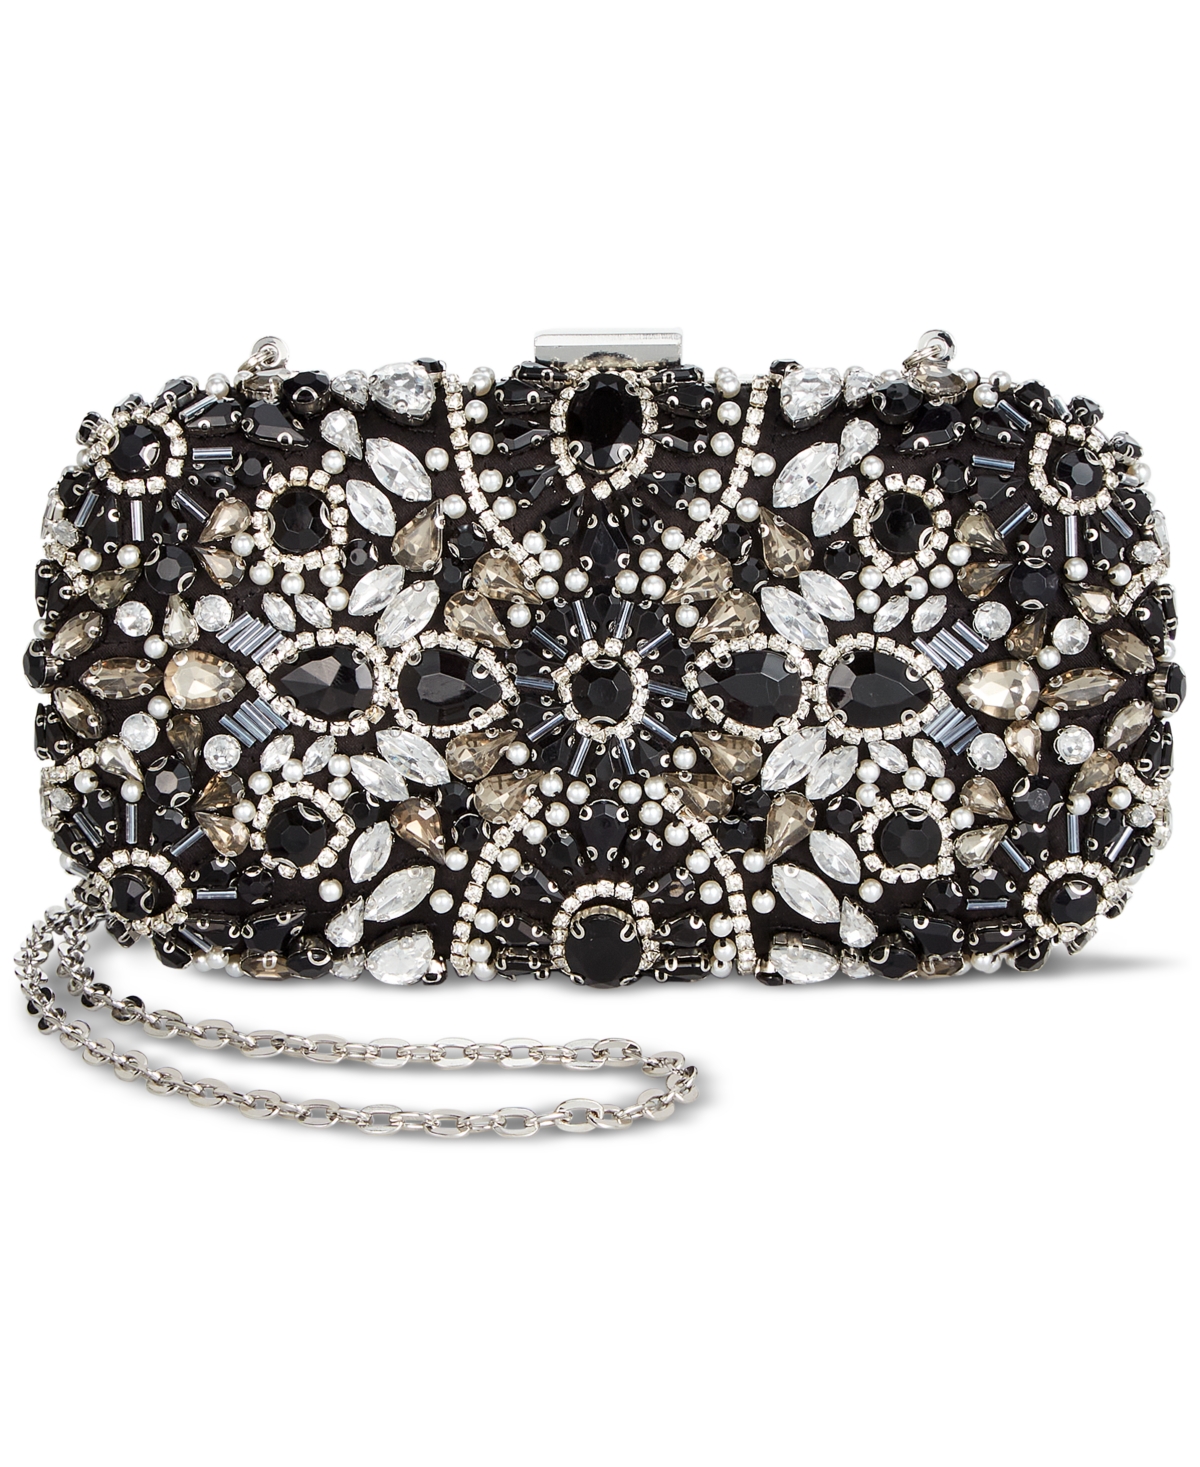 Beaded Alyssa Embellished Clutch, Created for Macy's - Black